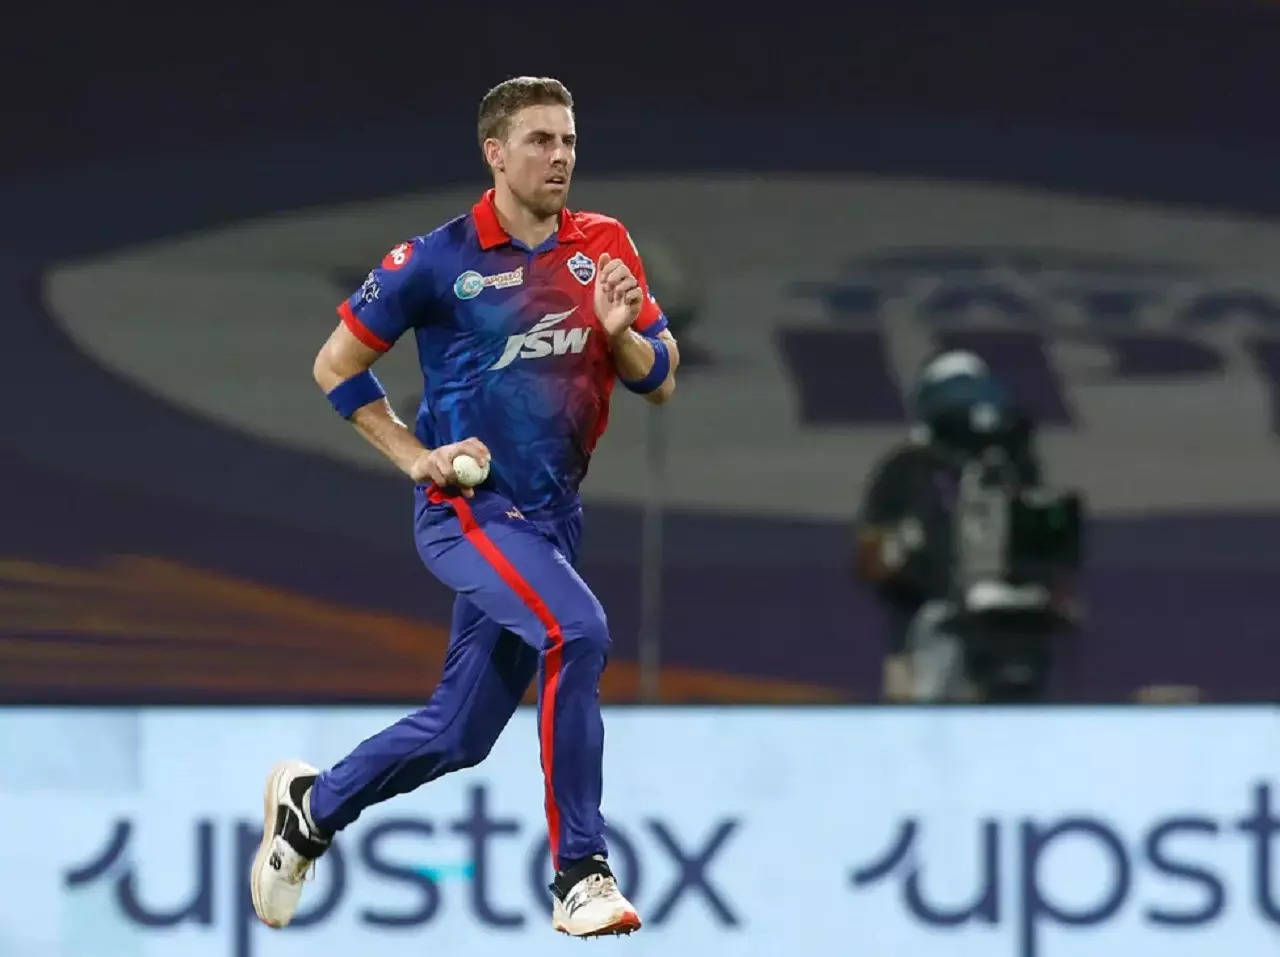 ‘Slowly but surely getting there’: Delhi Capitals star pacer Anrich Nortje gives update on his fitness